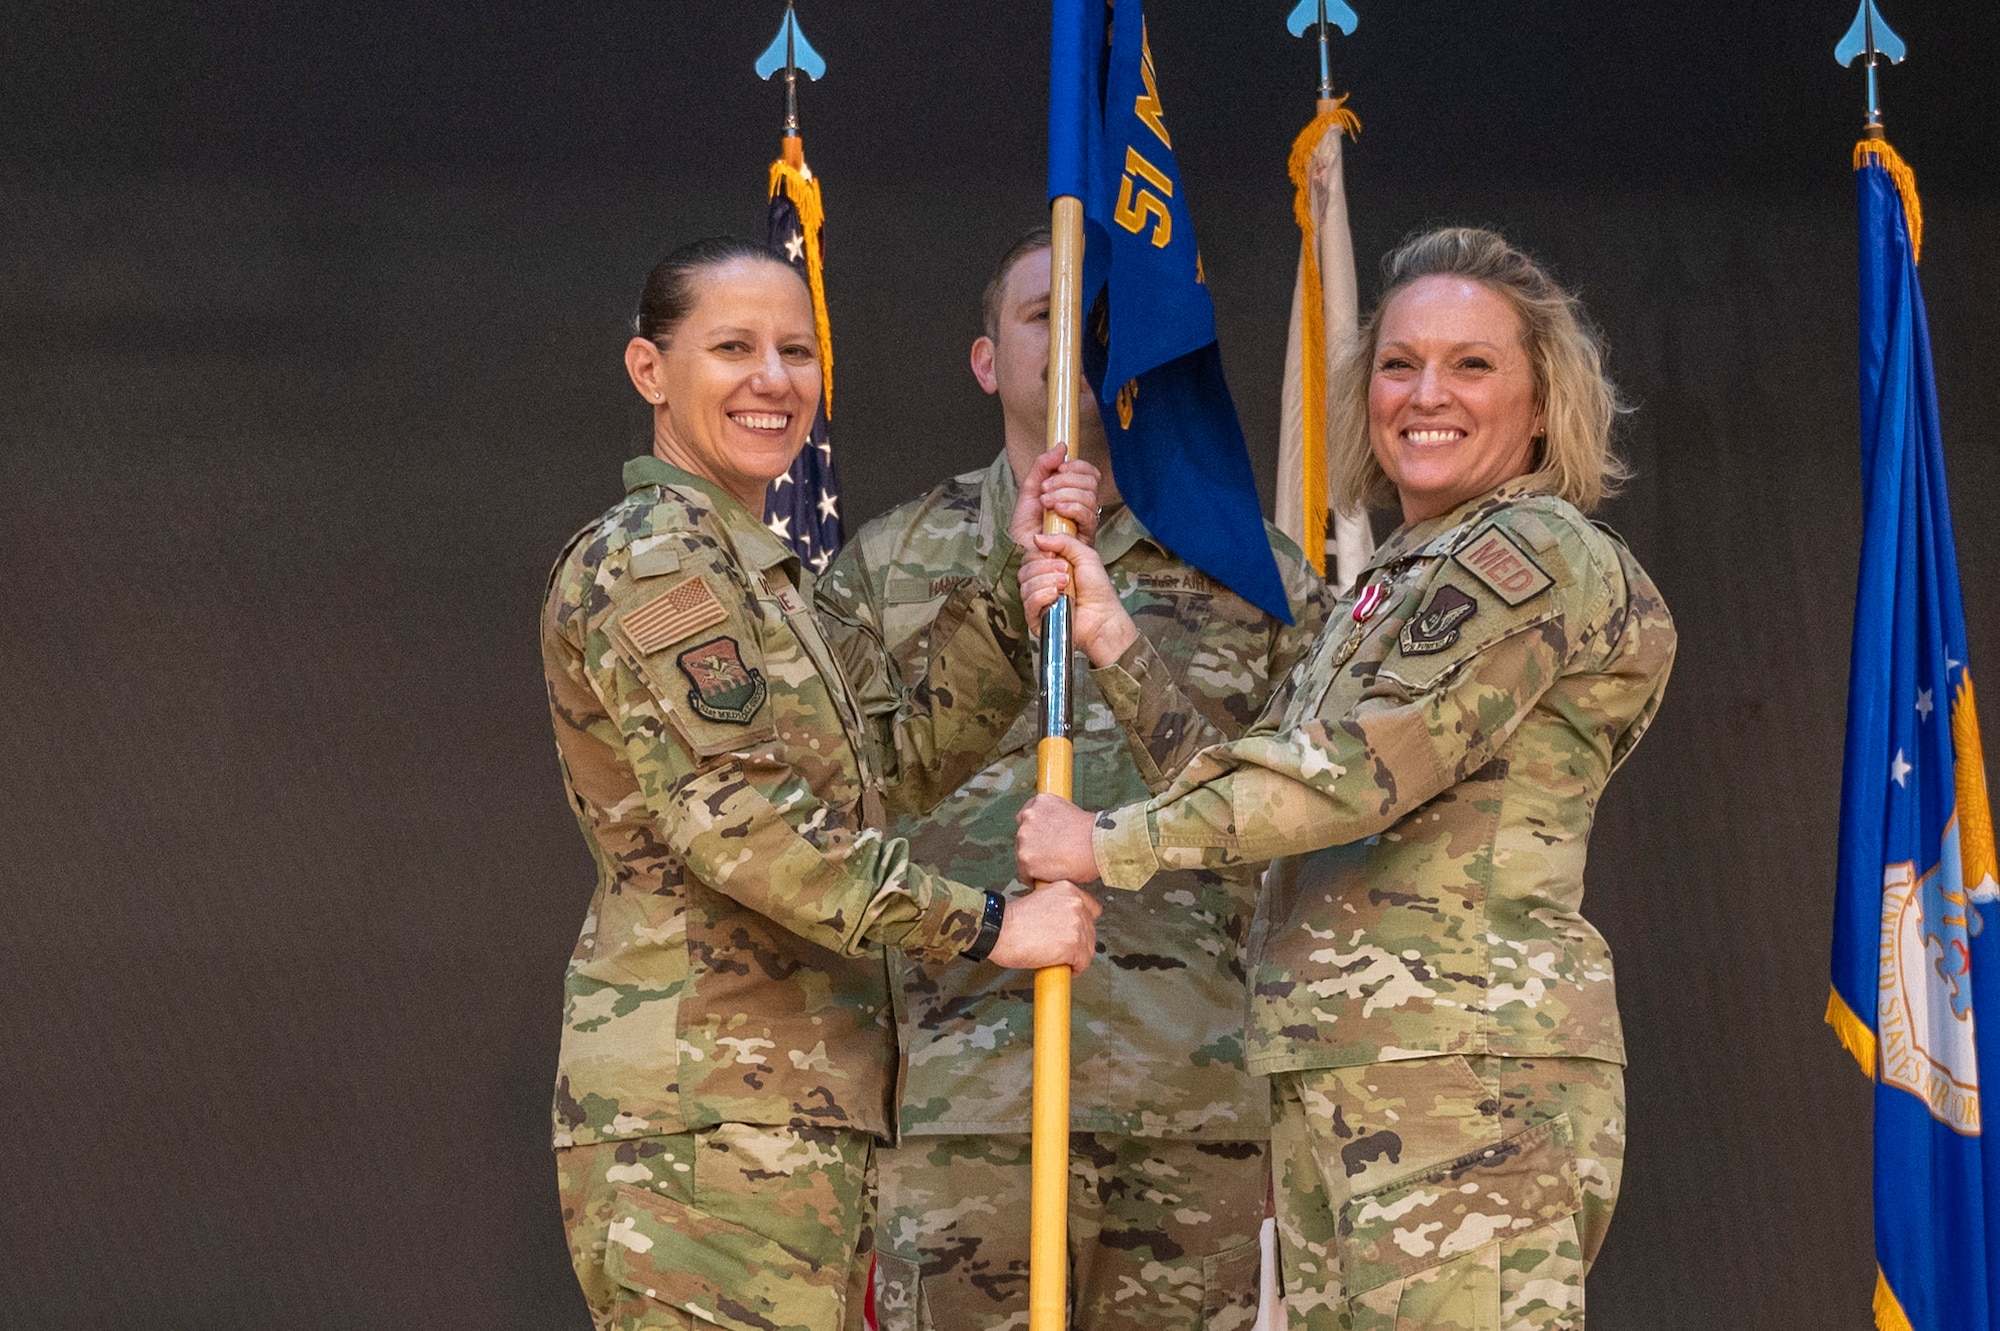 U.S. Air Force Col. Jennifer Vecchione, left, 51st Medical Group commander, receives the guidon from Lt. Col. Shannon Hunt, 51st Operational Medical Readiness Squadron outgoing commander, right, at Osan Air Base, Republic of Korea, June 8, 2023. In a change of command ceremony, the guidon symbolizes the transfer of command, the authority and responsibility associated with it. (U.S. Air Force photo by Airman 1st Class Aaron Edwards)